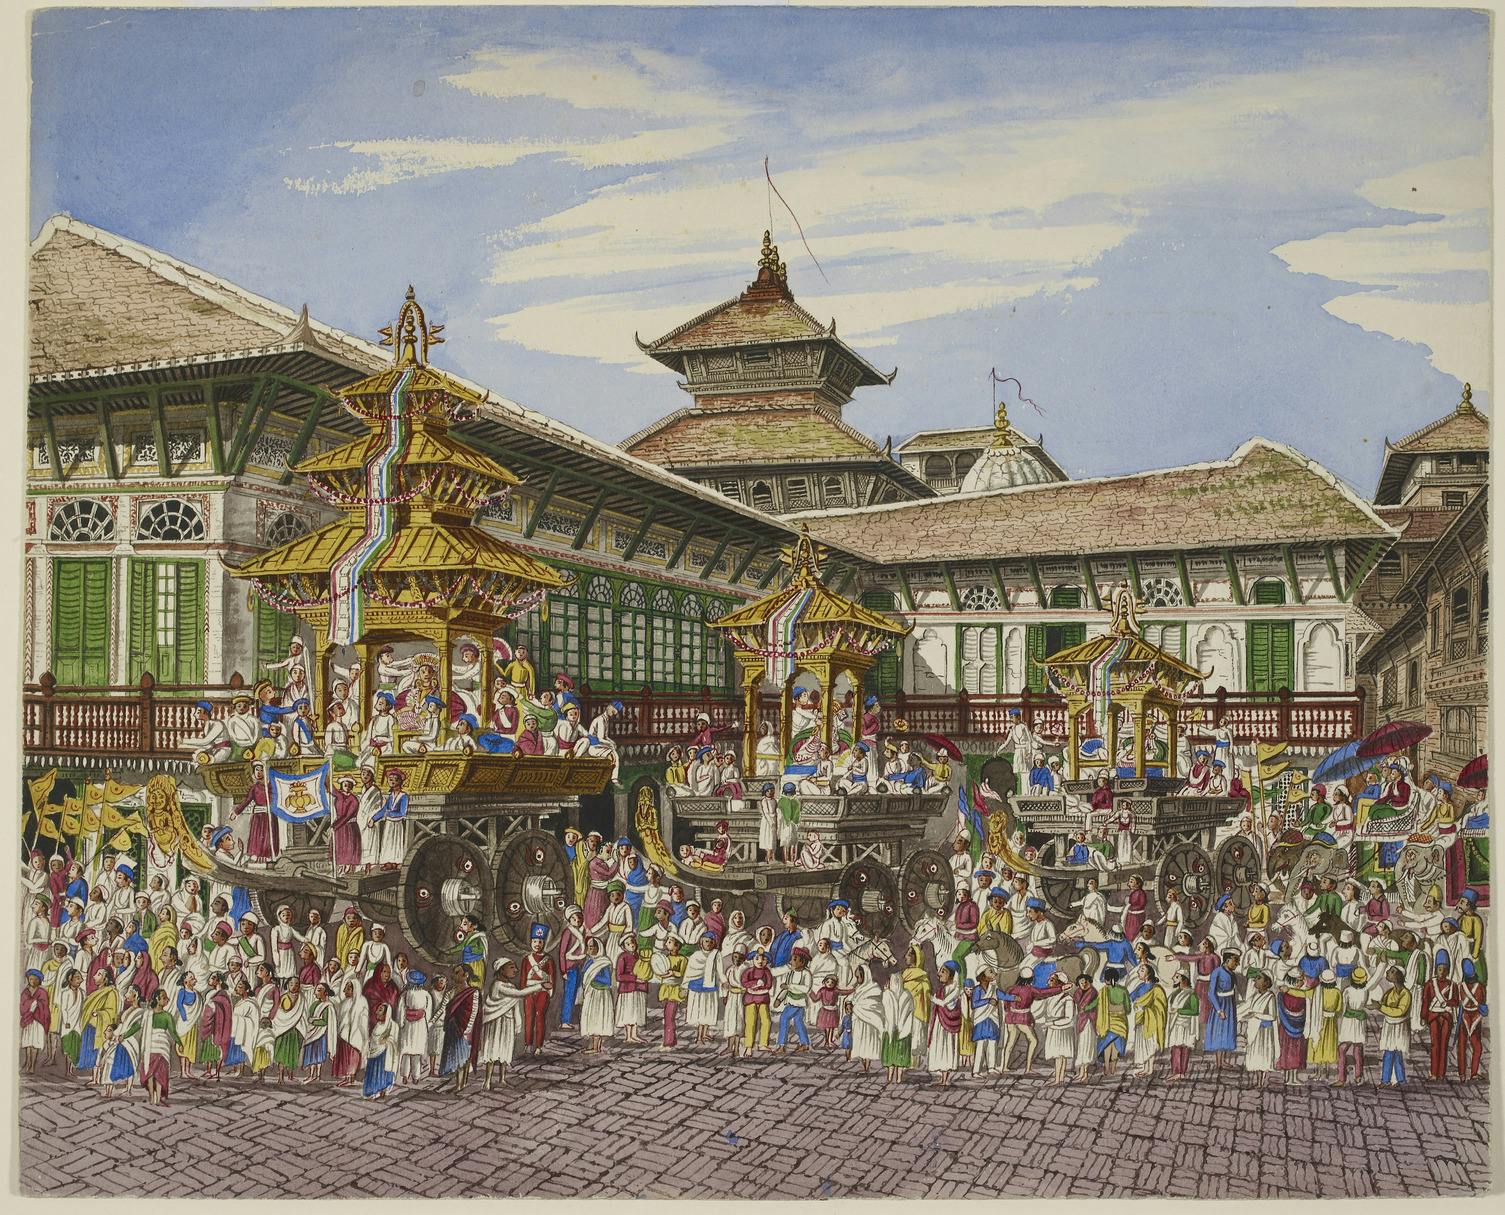 A colorful drawing (with many vibrant blues, reds, greens, and yellows) of an ornate building in India, with many people in the square in front of it, celebrating the festival of Kumari Jatra.